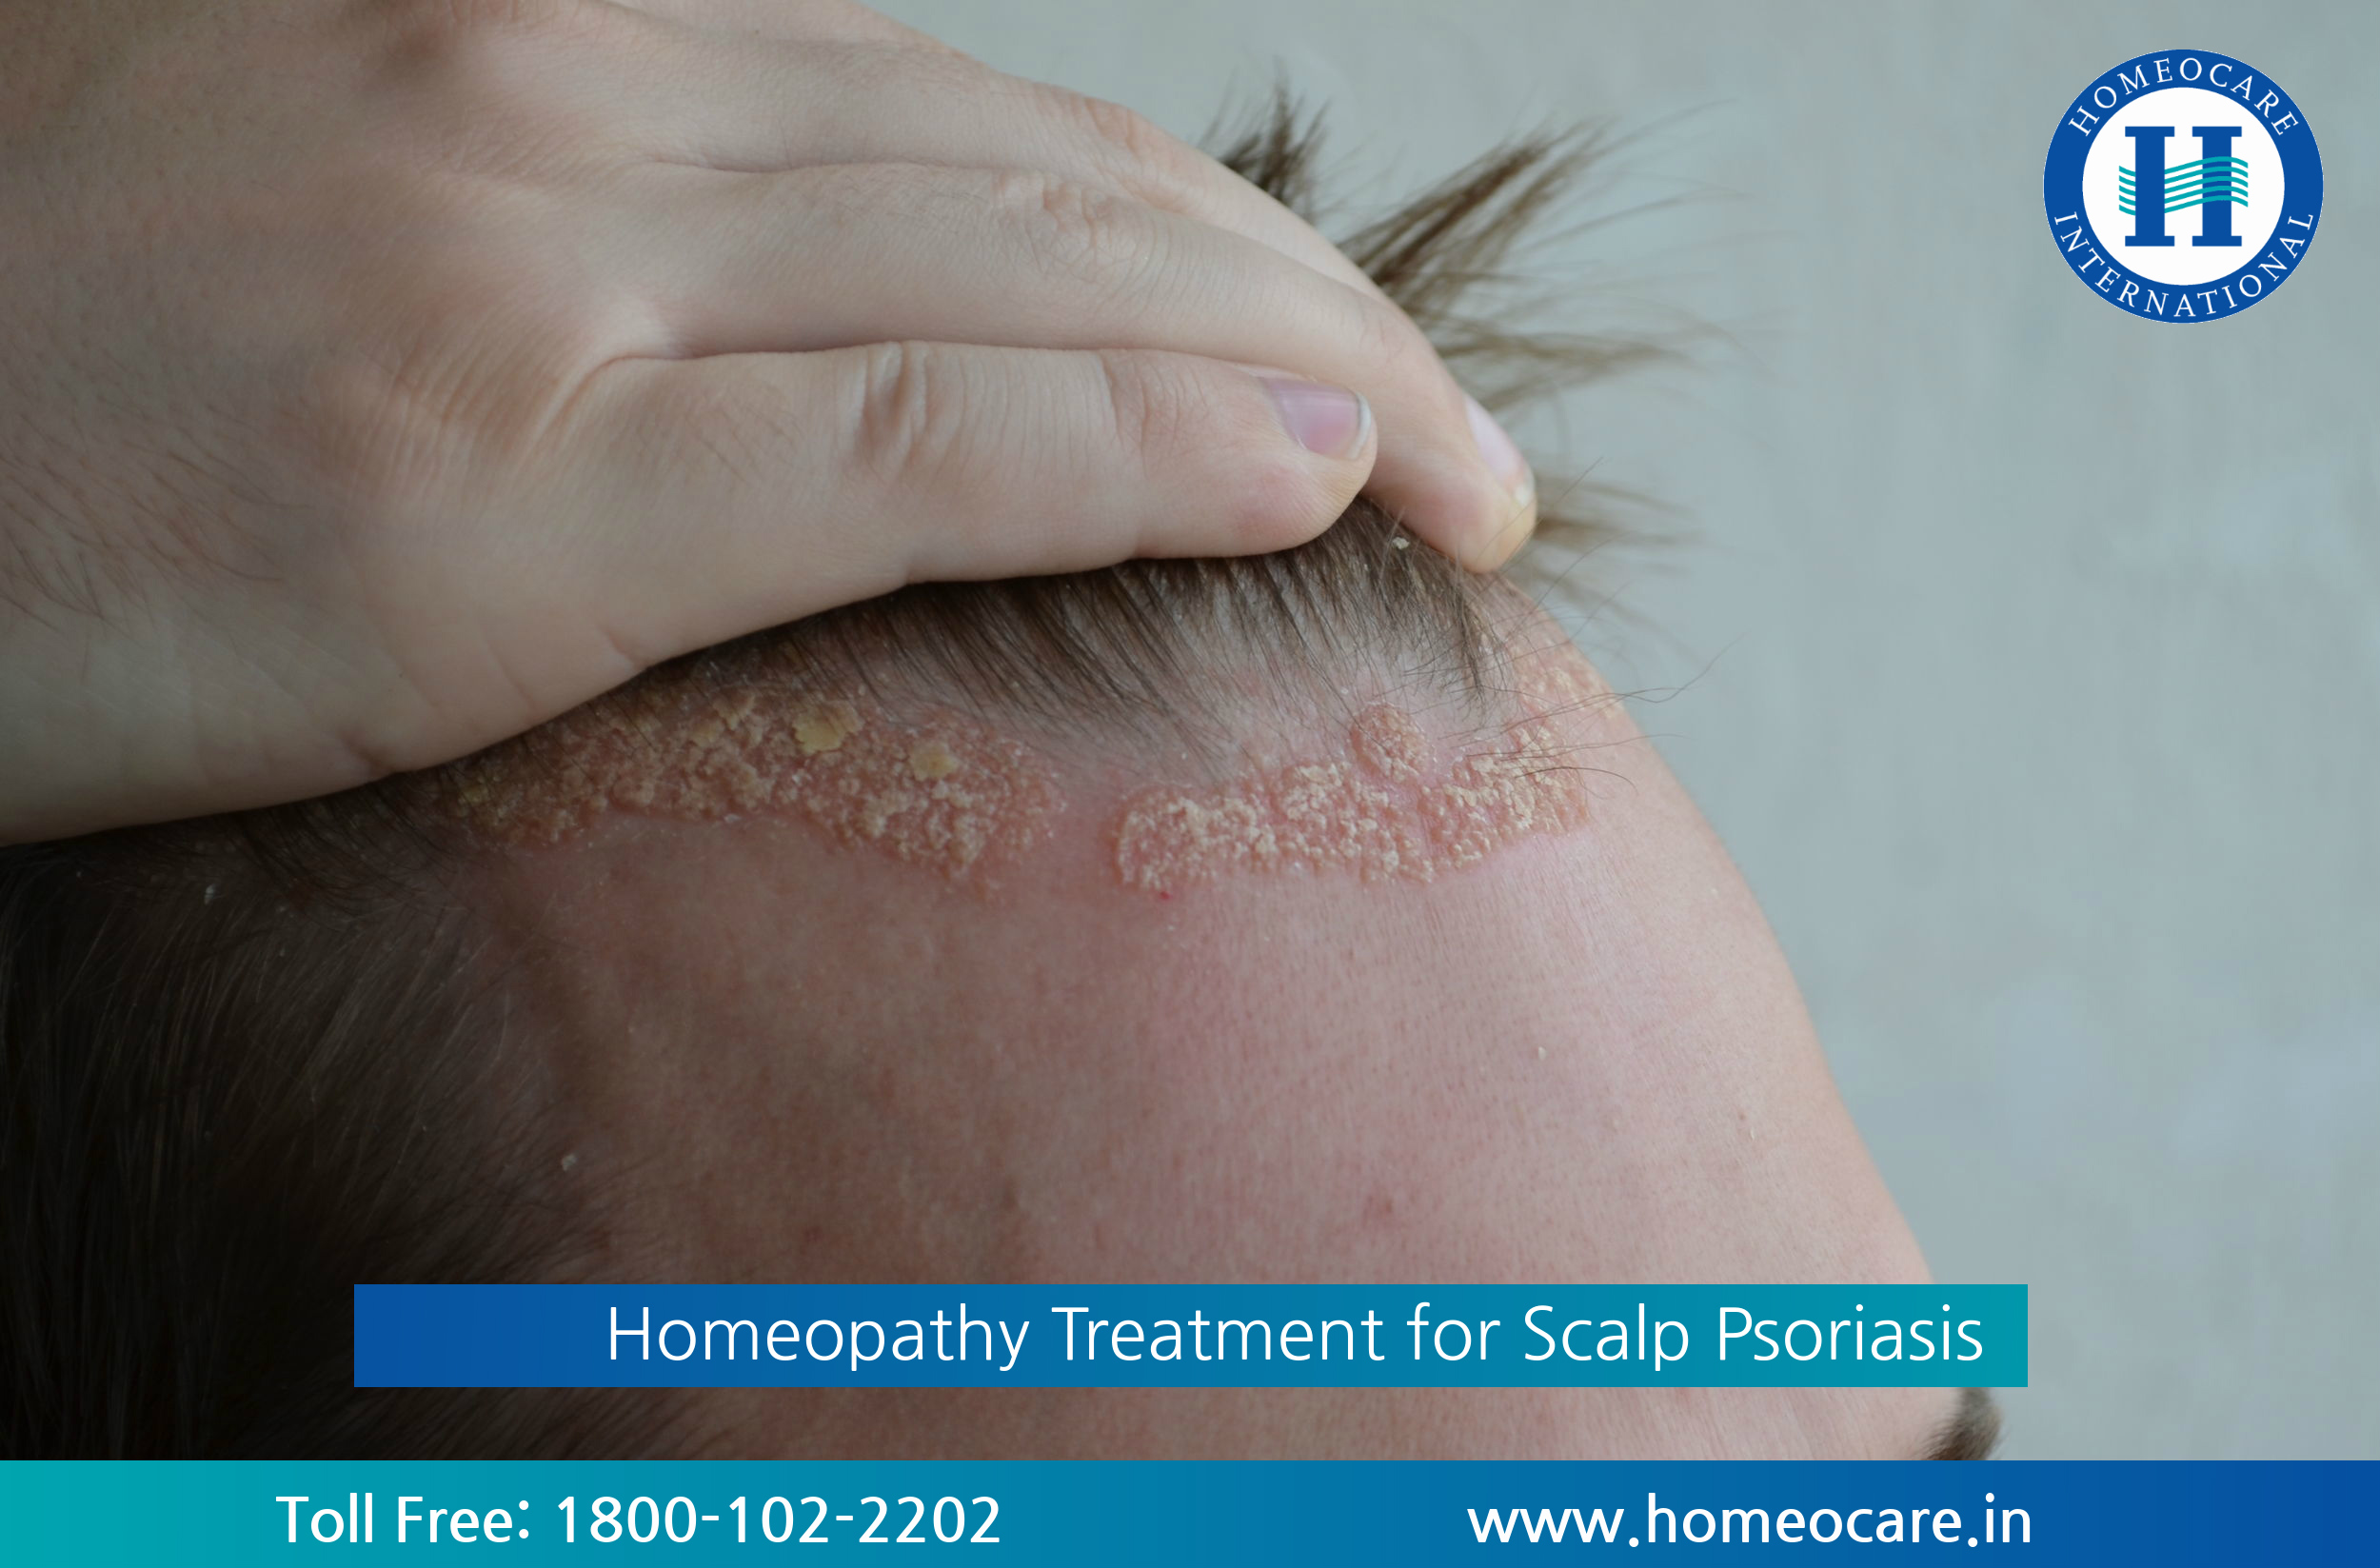 Homeopathy Treatment for Scalp Psoriasis